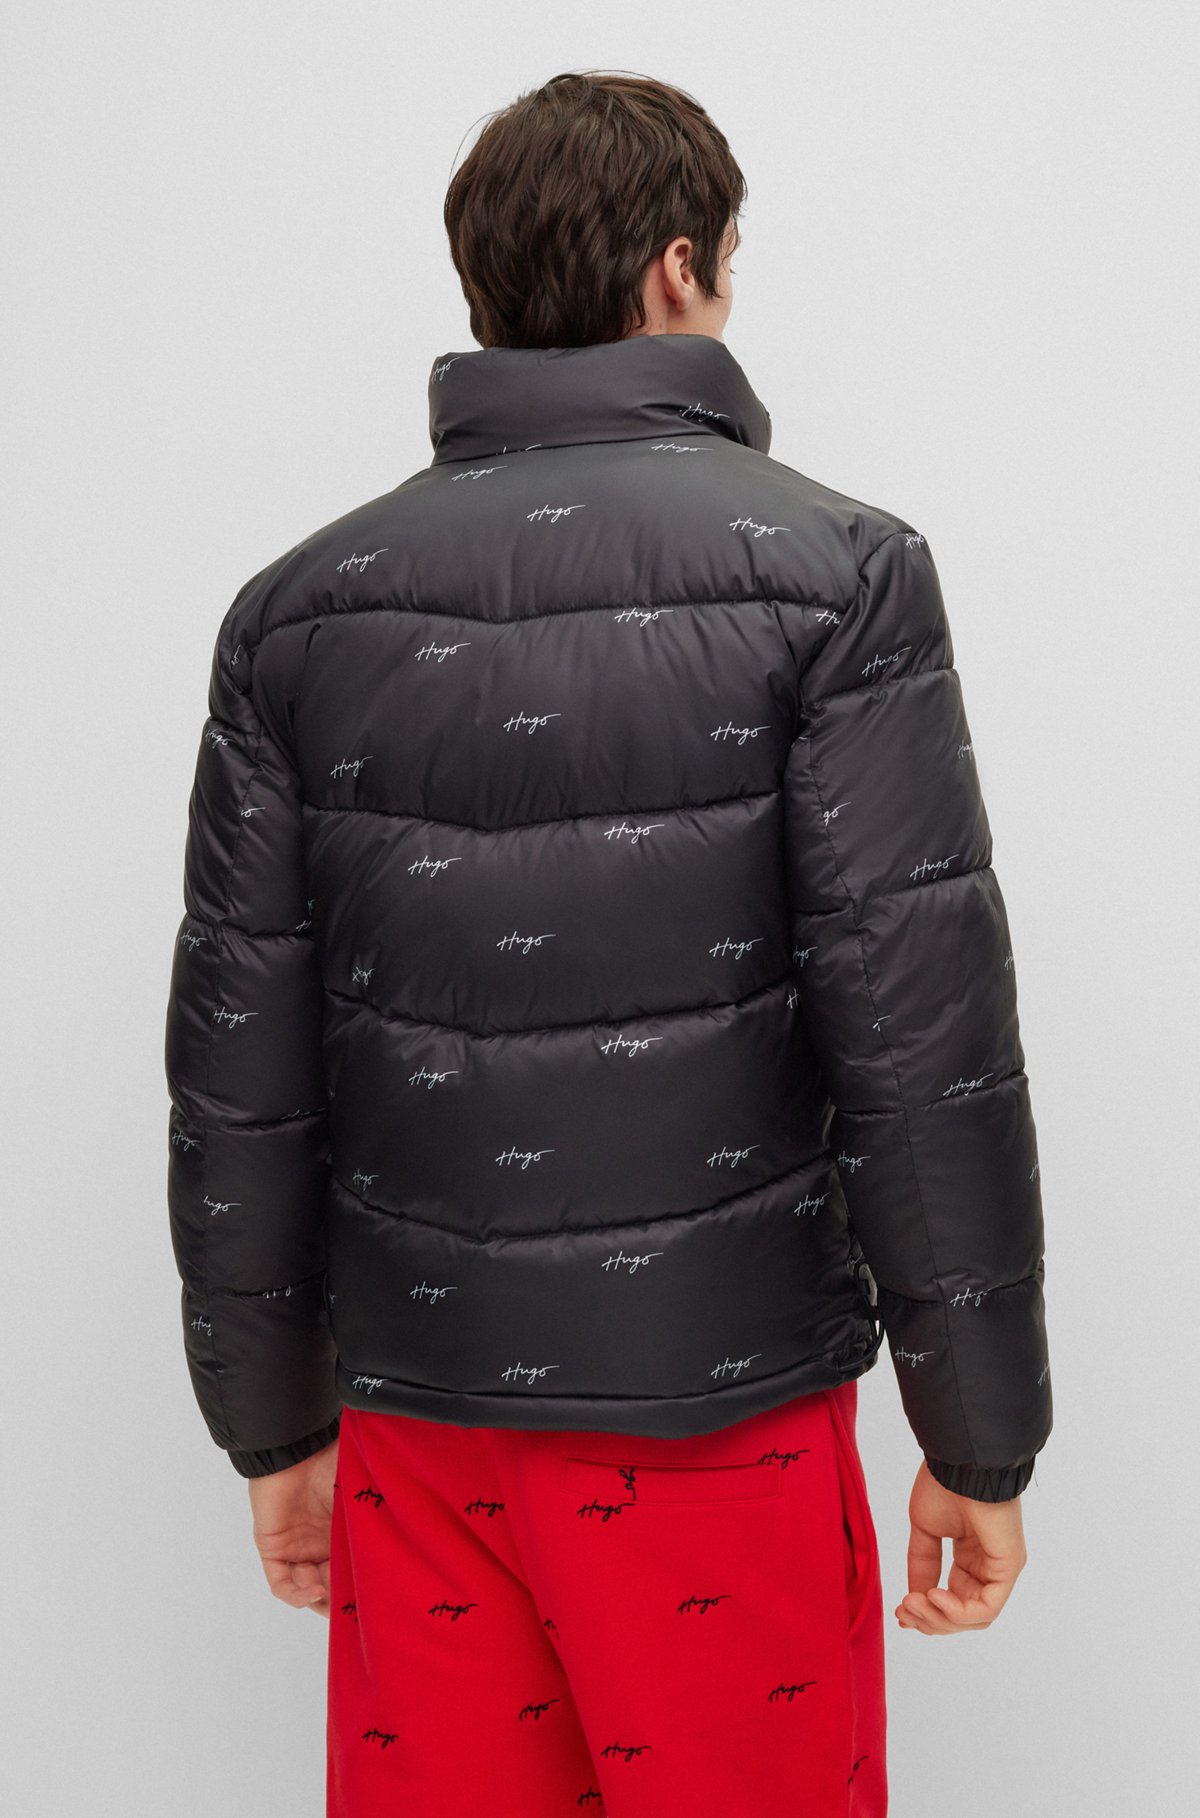 HUGO - Recycled-material padded jacket with handwritten logos